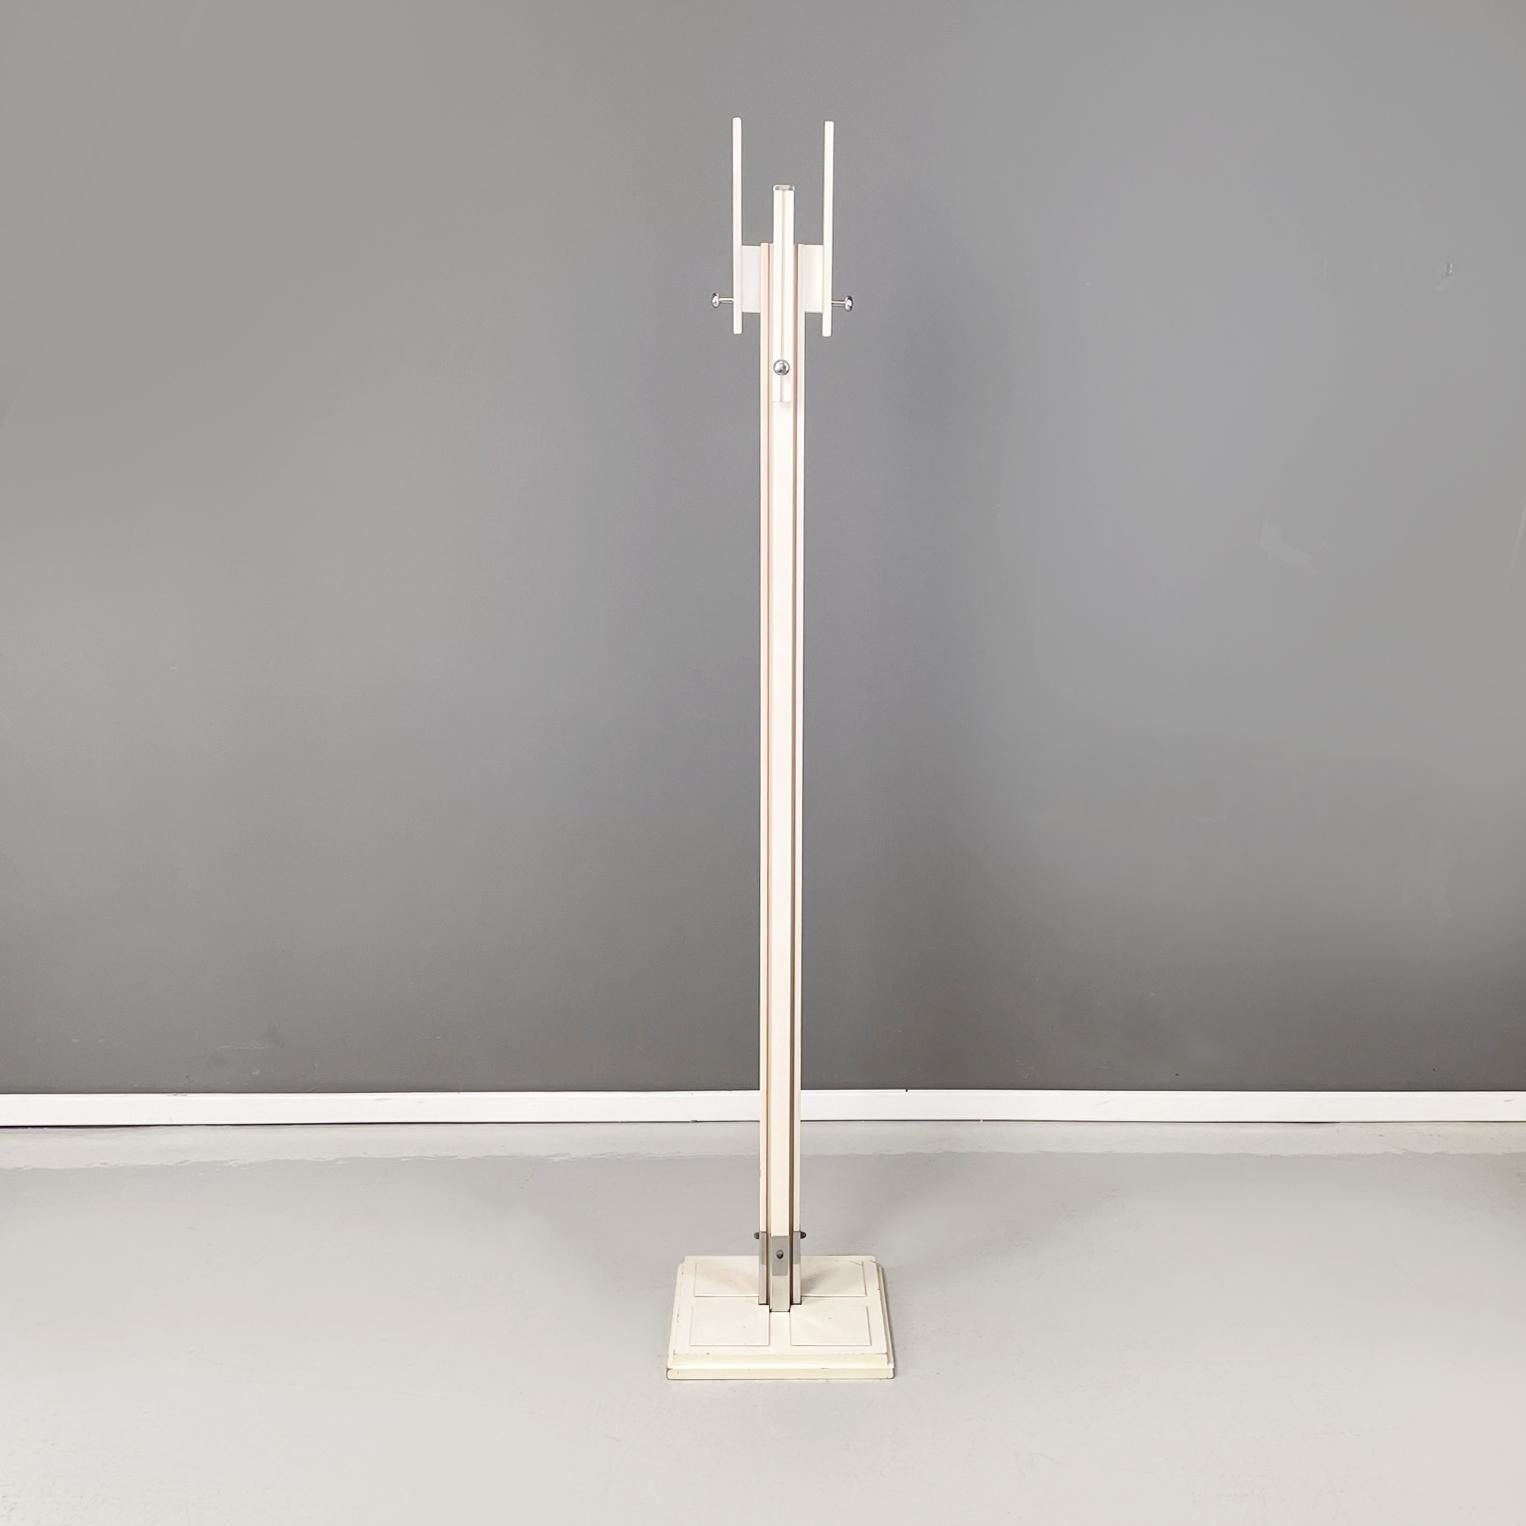 Italian midcentury white wood metal Coat stand by Carlo de Carli for Fiarm, 1960s
Coat stand with square base in white painted wood and metal. In the upper part it has 4 metal hooks with different heights. The central structure is made up of a